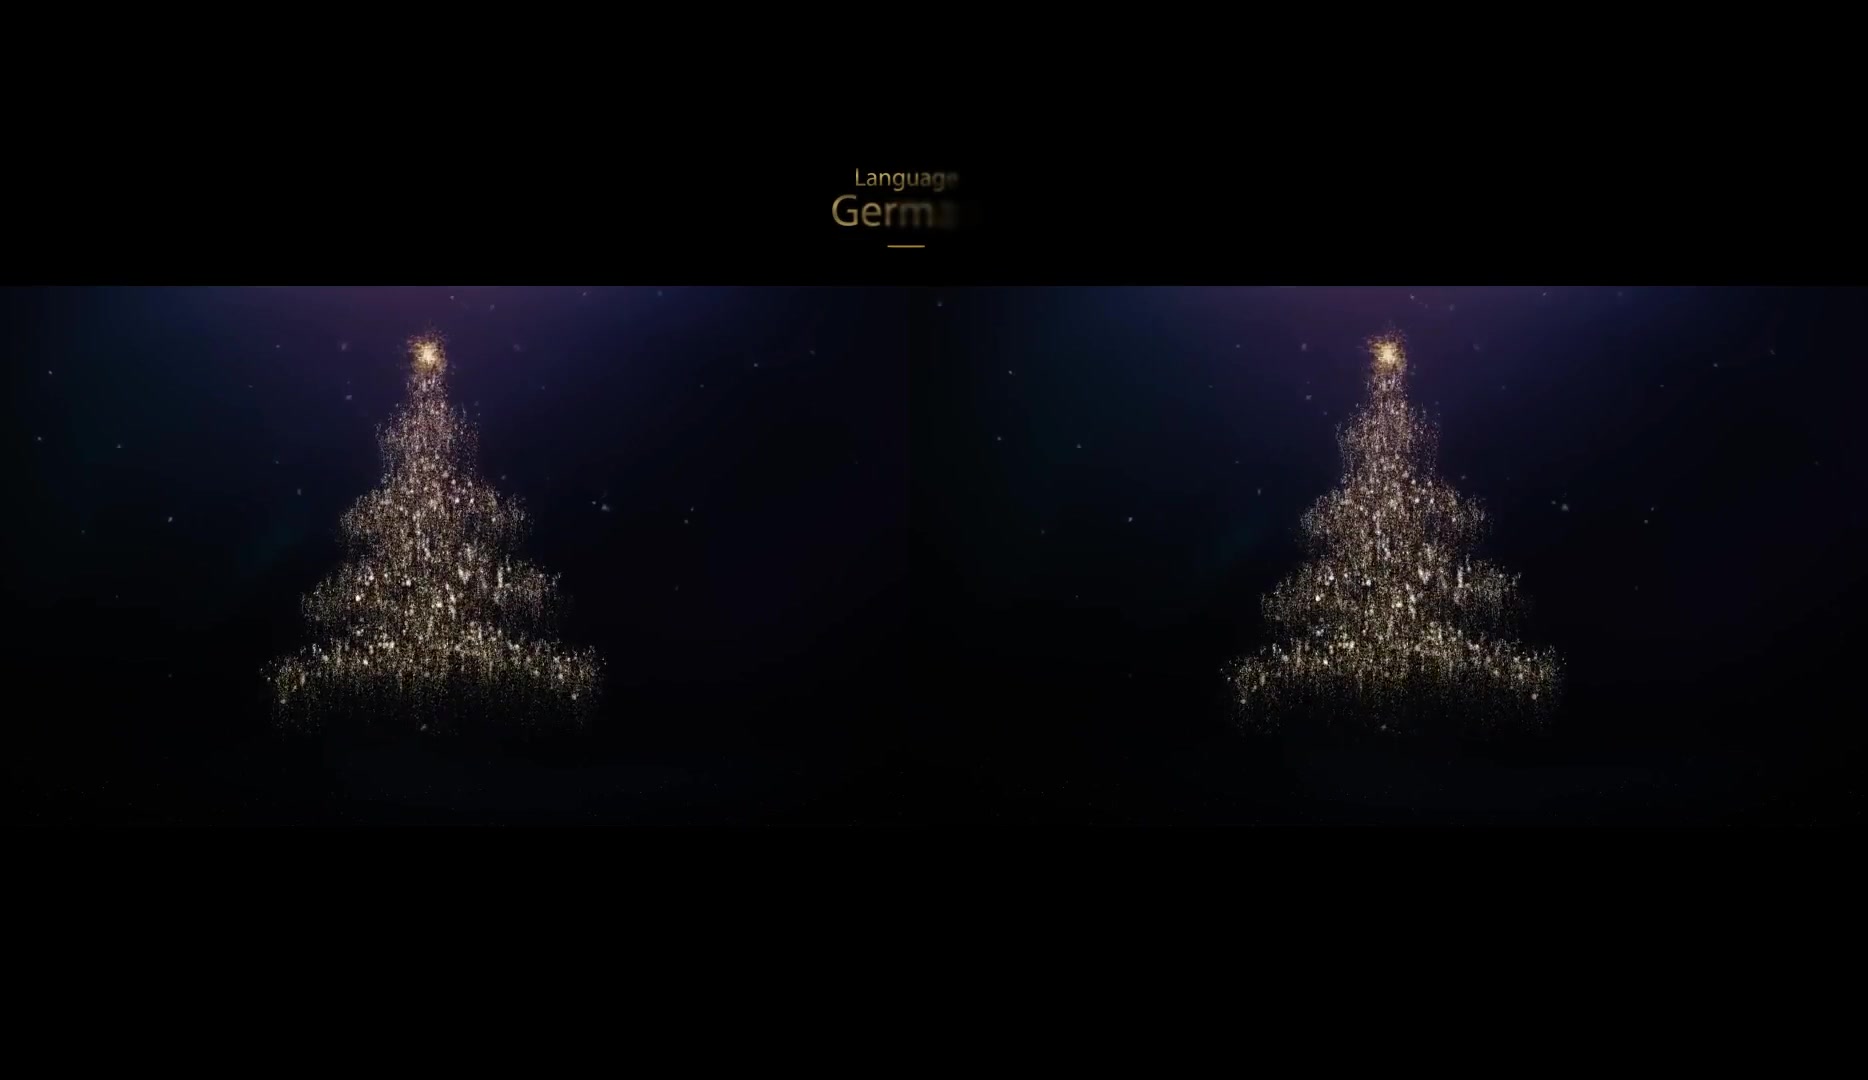 Noel Christmas Greetings for Final Cut Pro - Download Videohive 22663396